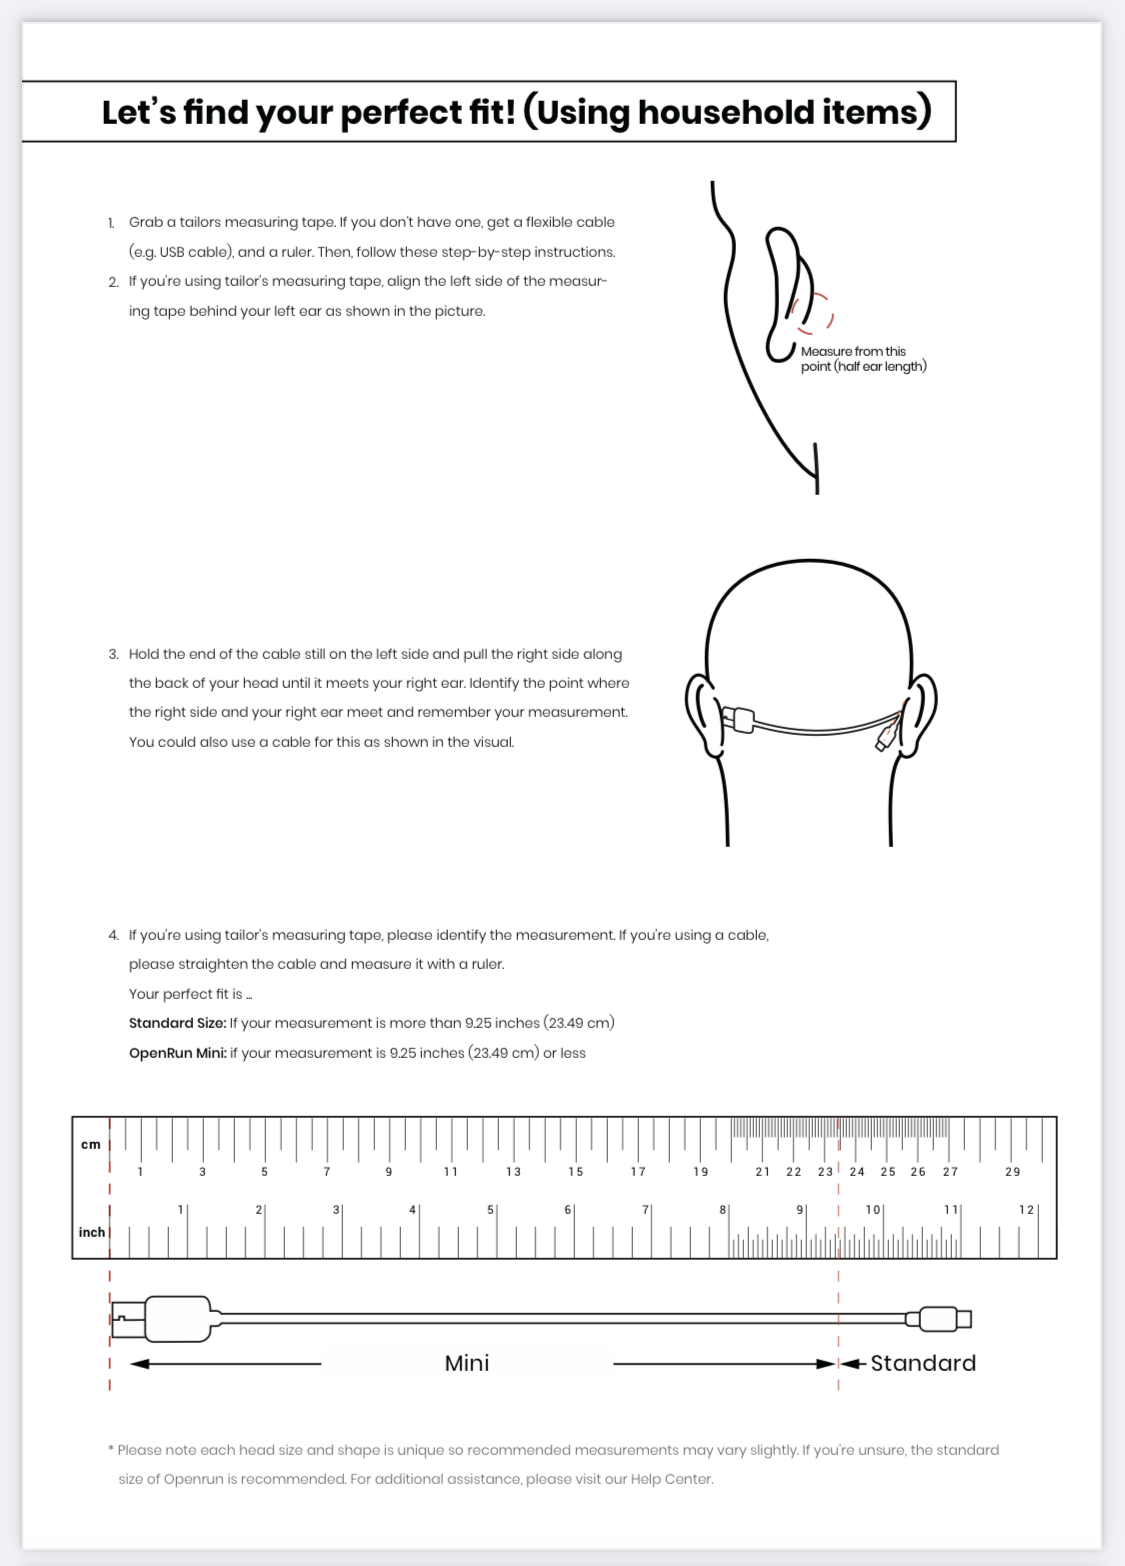 A PDF showing measuring one’s head with a USB cable.